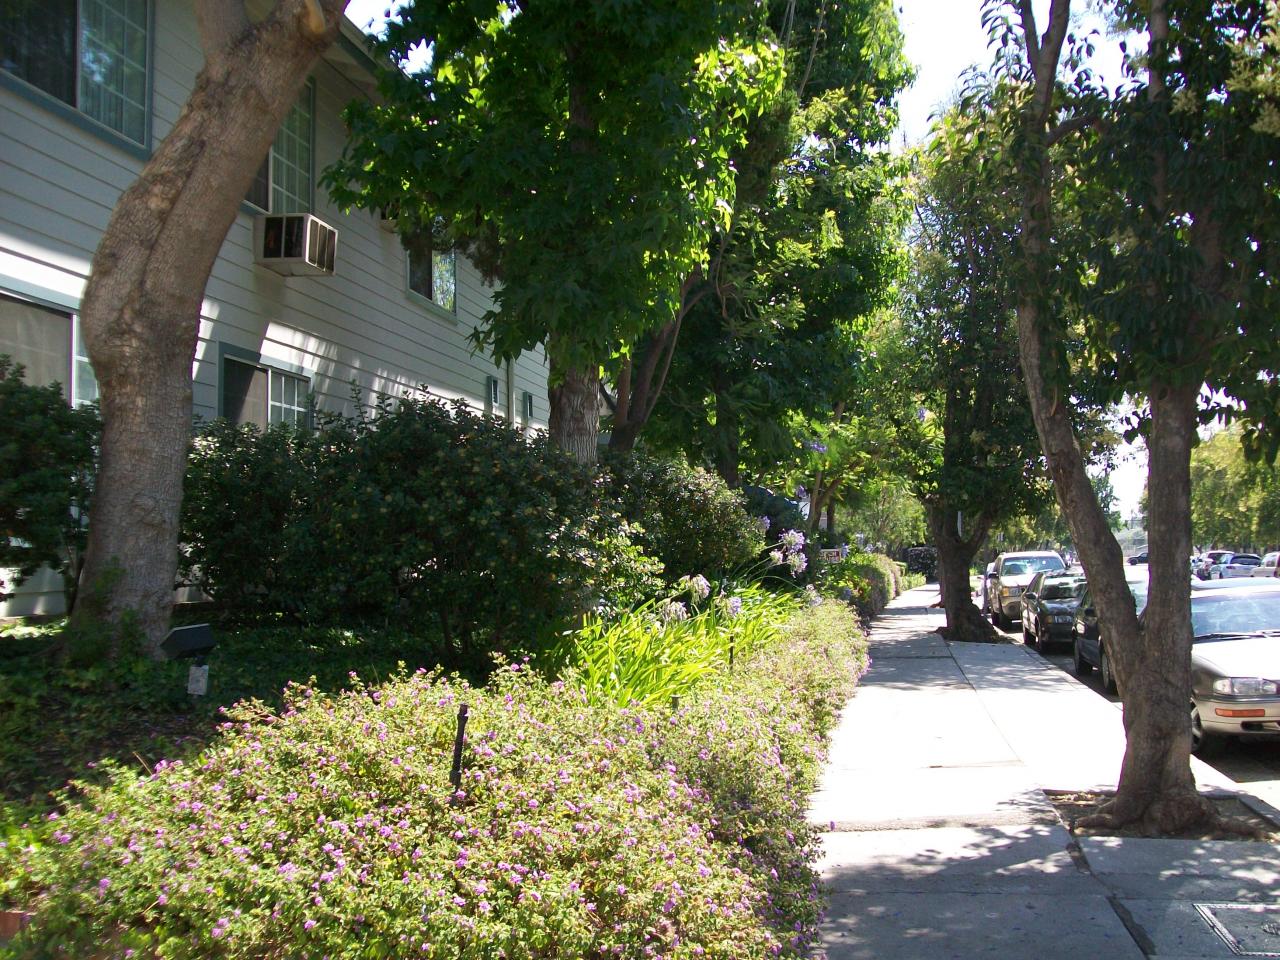 Photo of Kingsbury Villas Apartments - a view of the front sidewalk